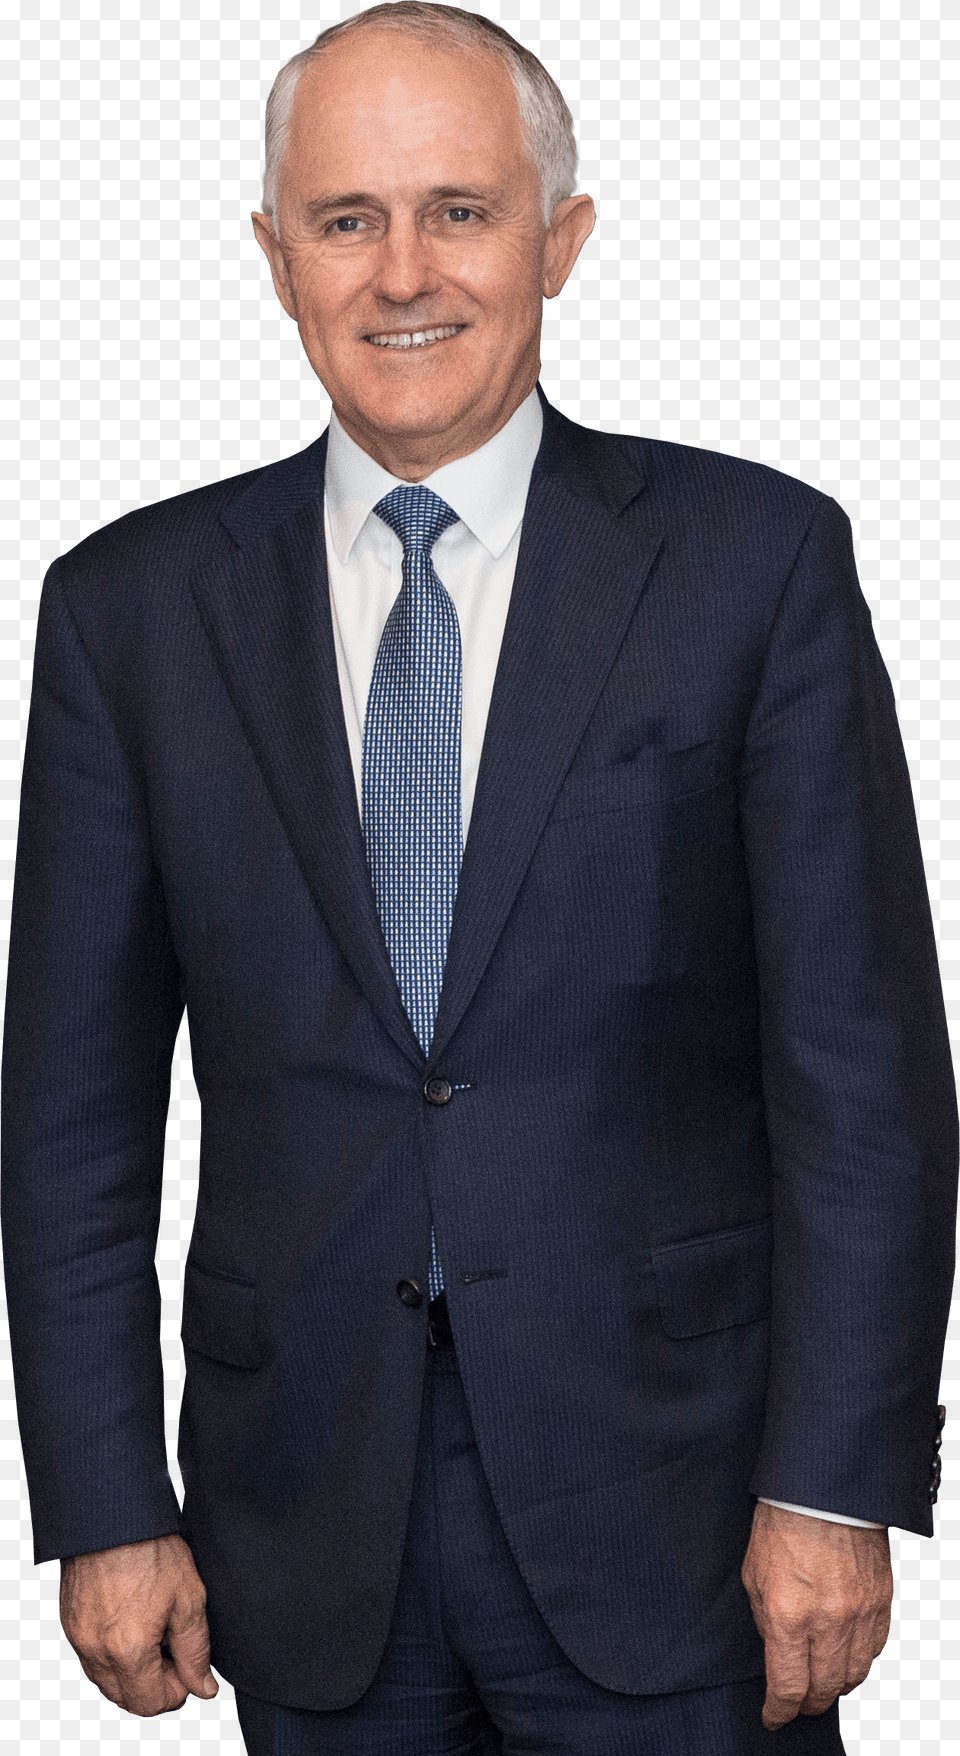 Malcolm Turnbull Transparent Background Malcolm Turnbull Transparent, Accessories, Suit, Jacket, Formal Wear Png Image